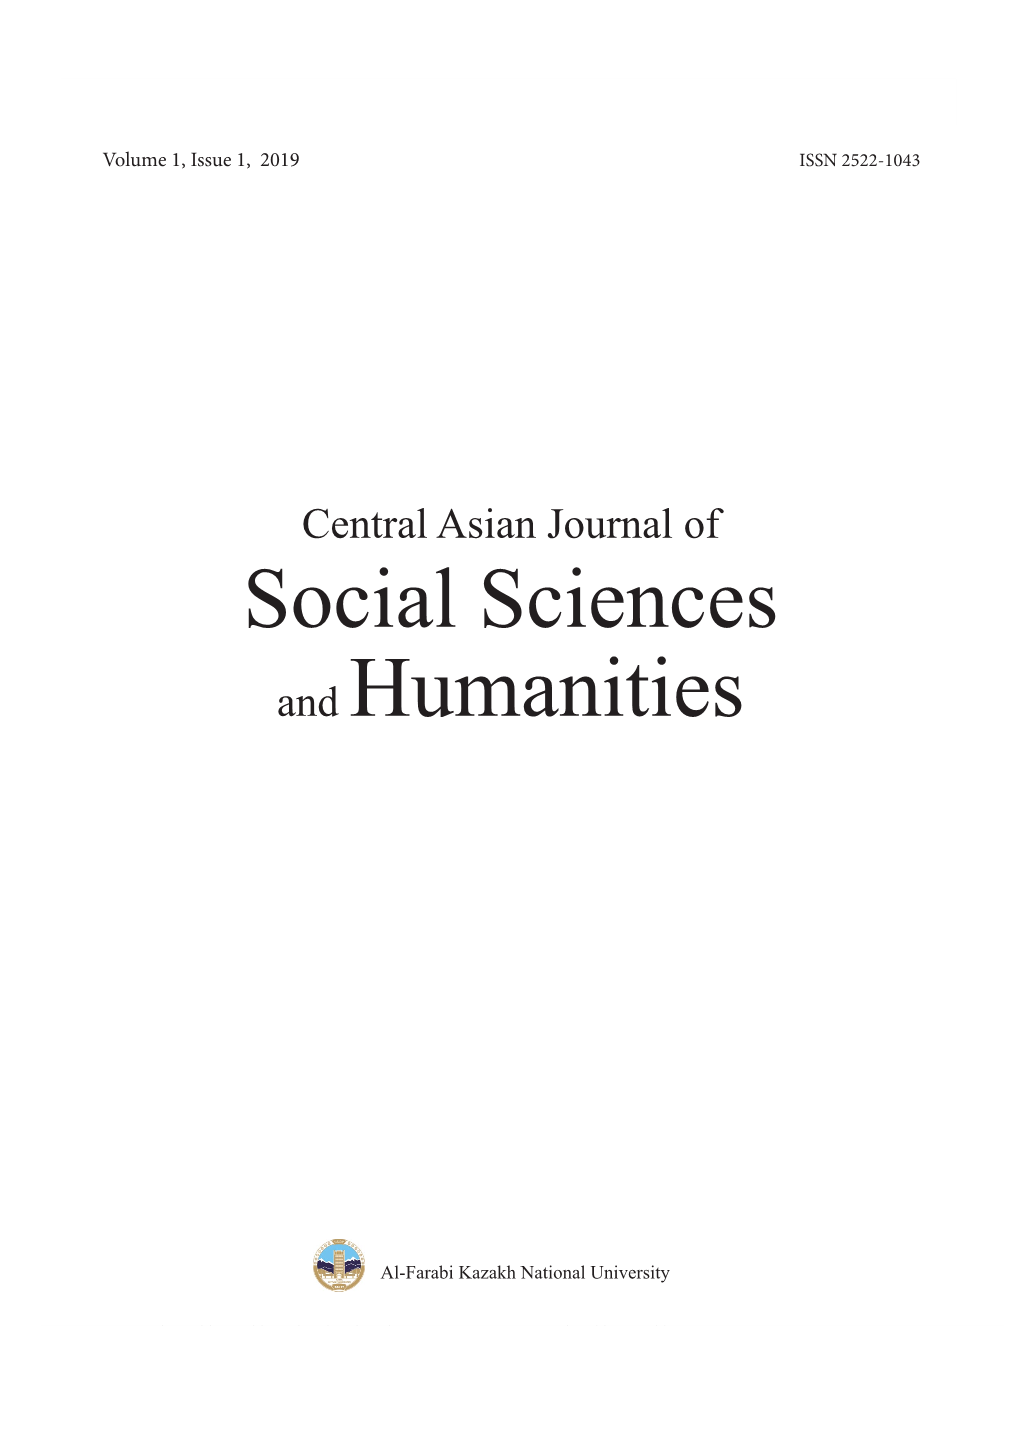 Social Sciences and Humanities